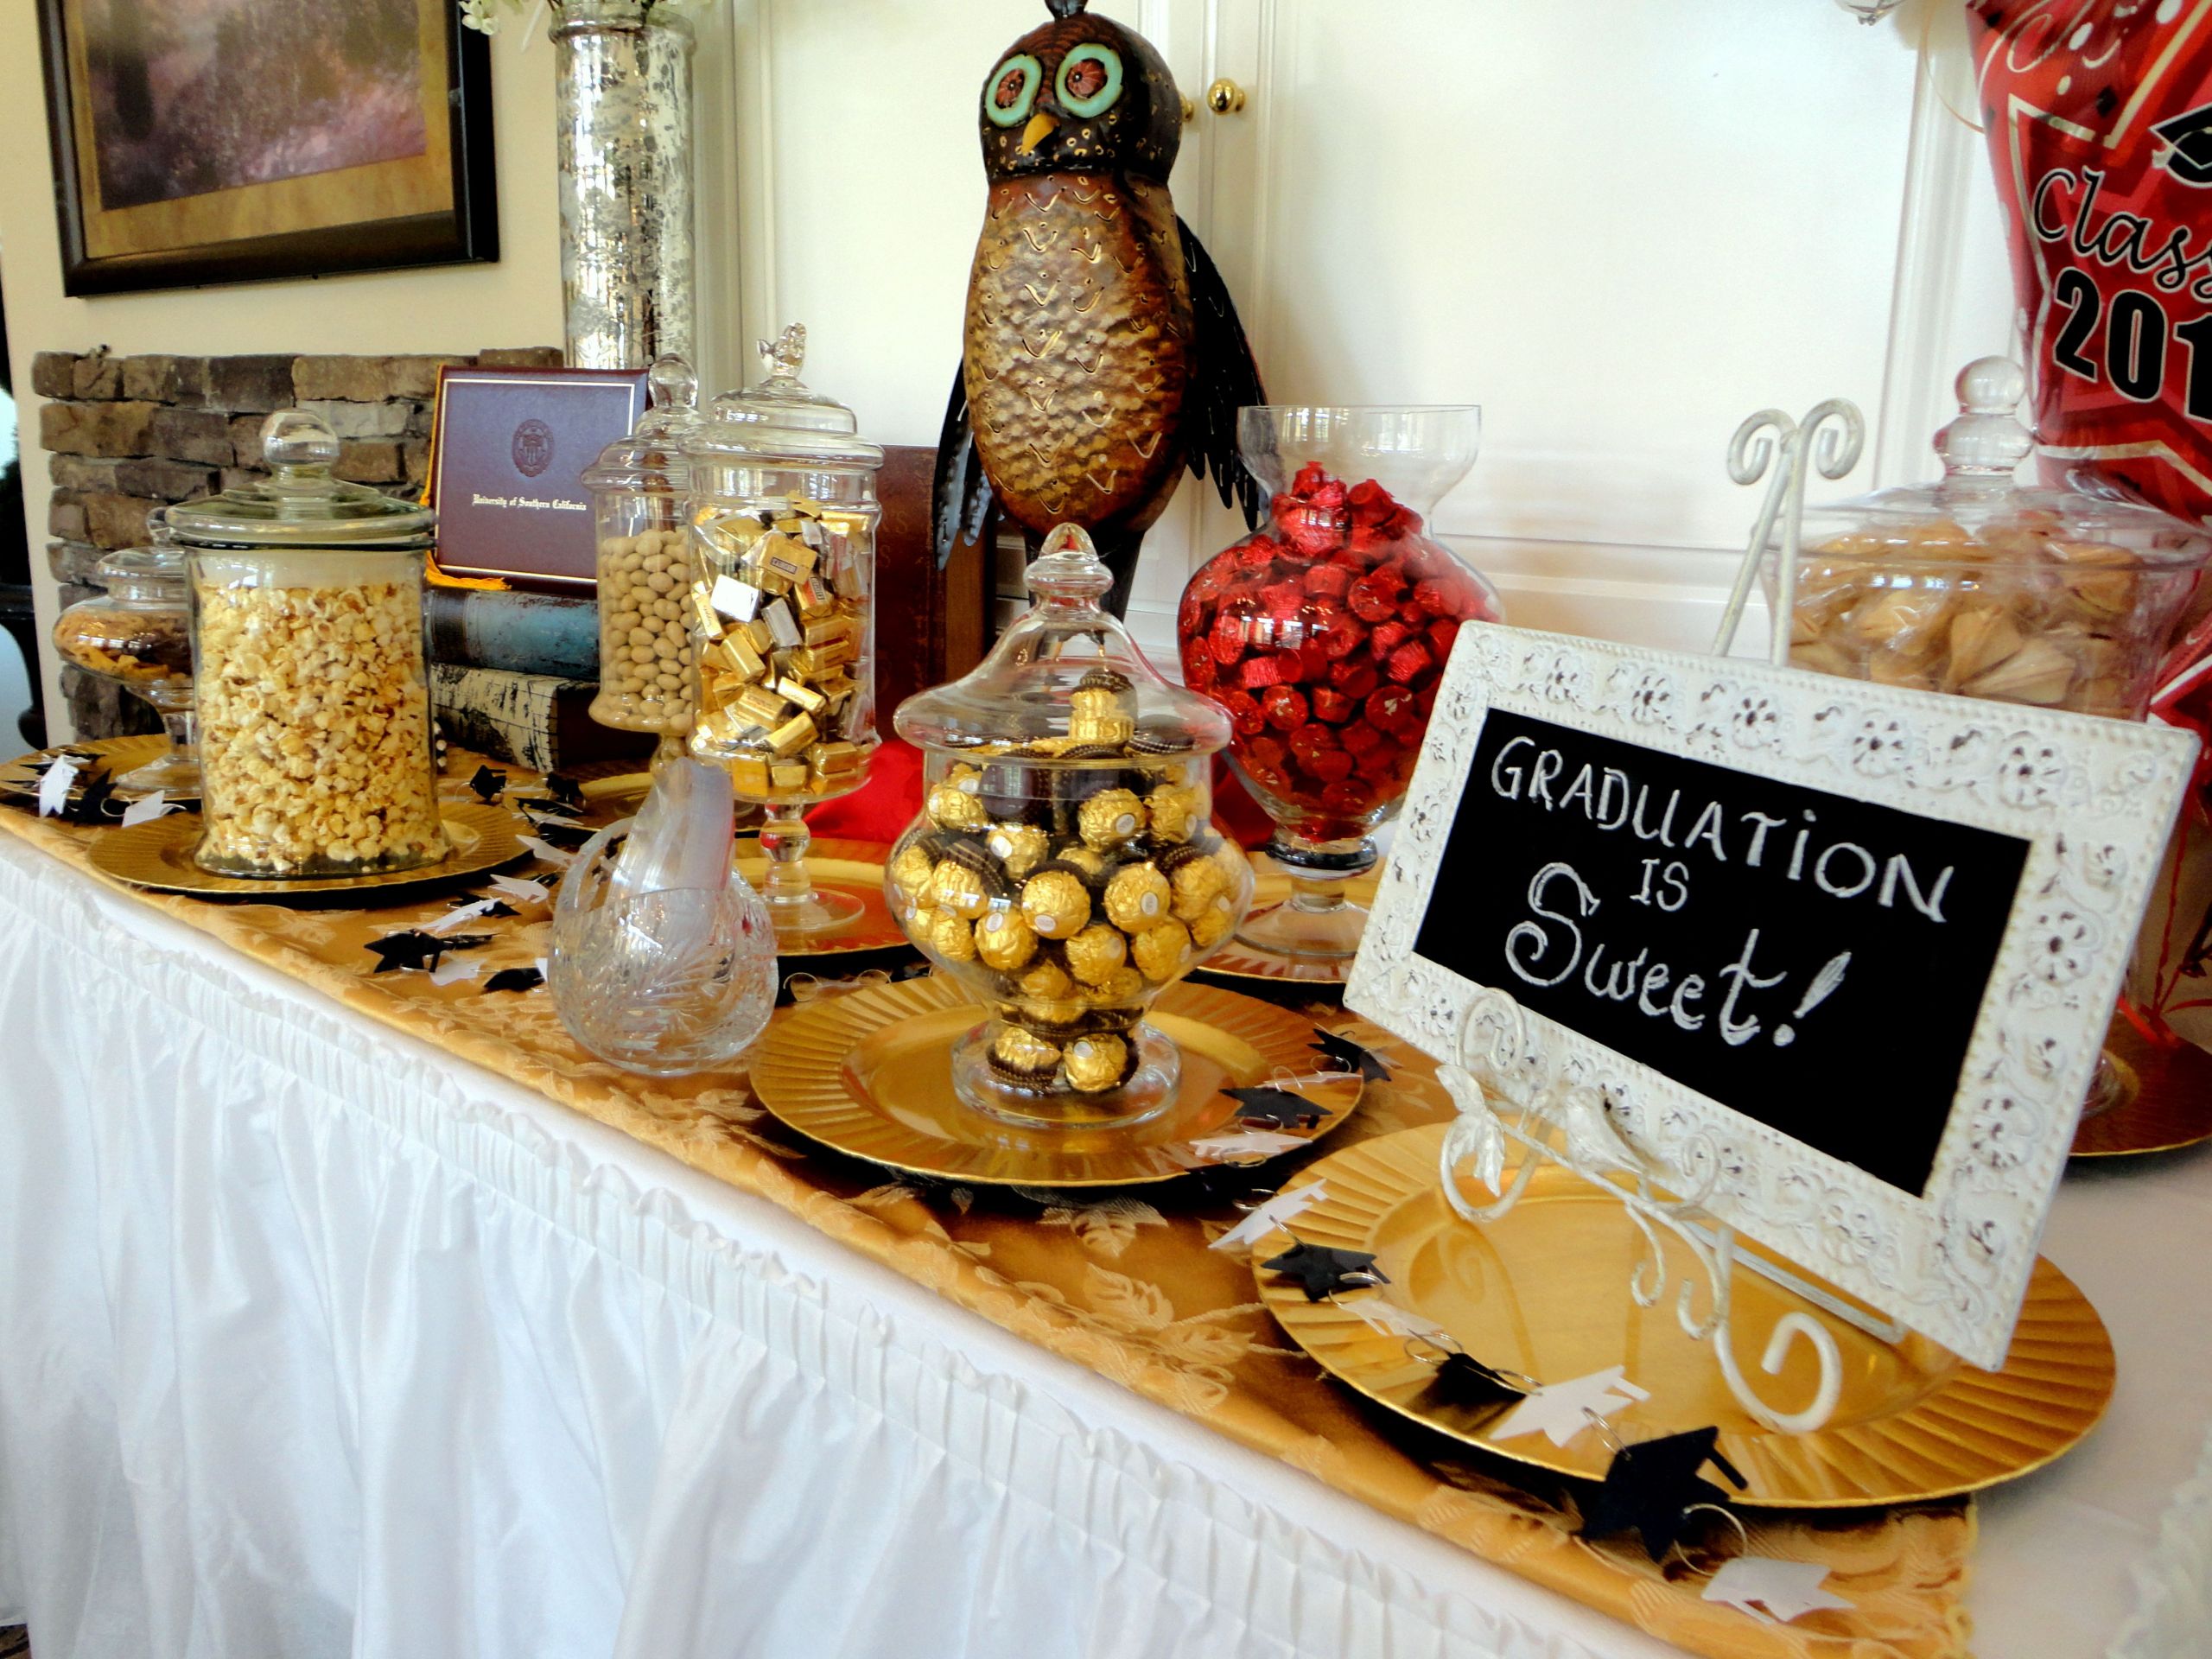 Graduation Party Buffet Ideas
 Dessert table my mother created for my USC graduation